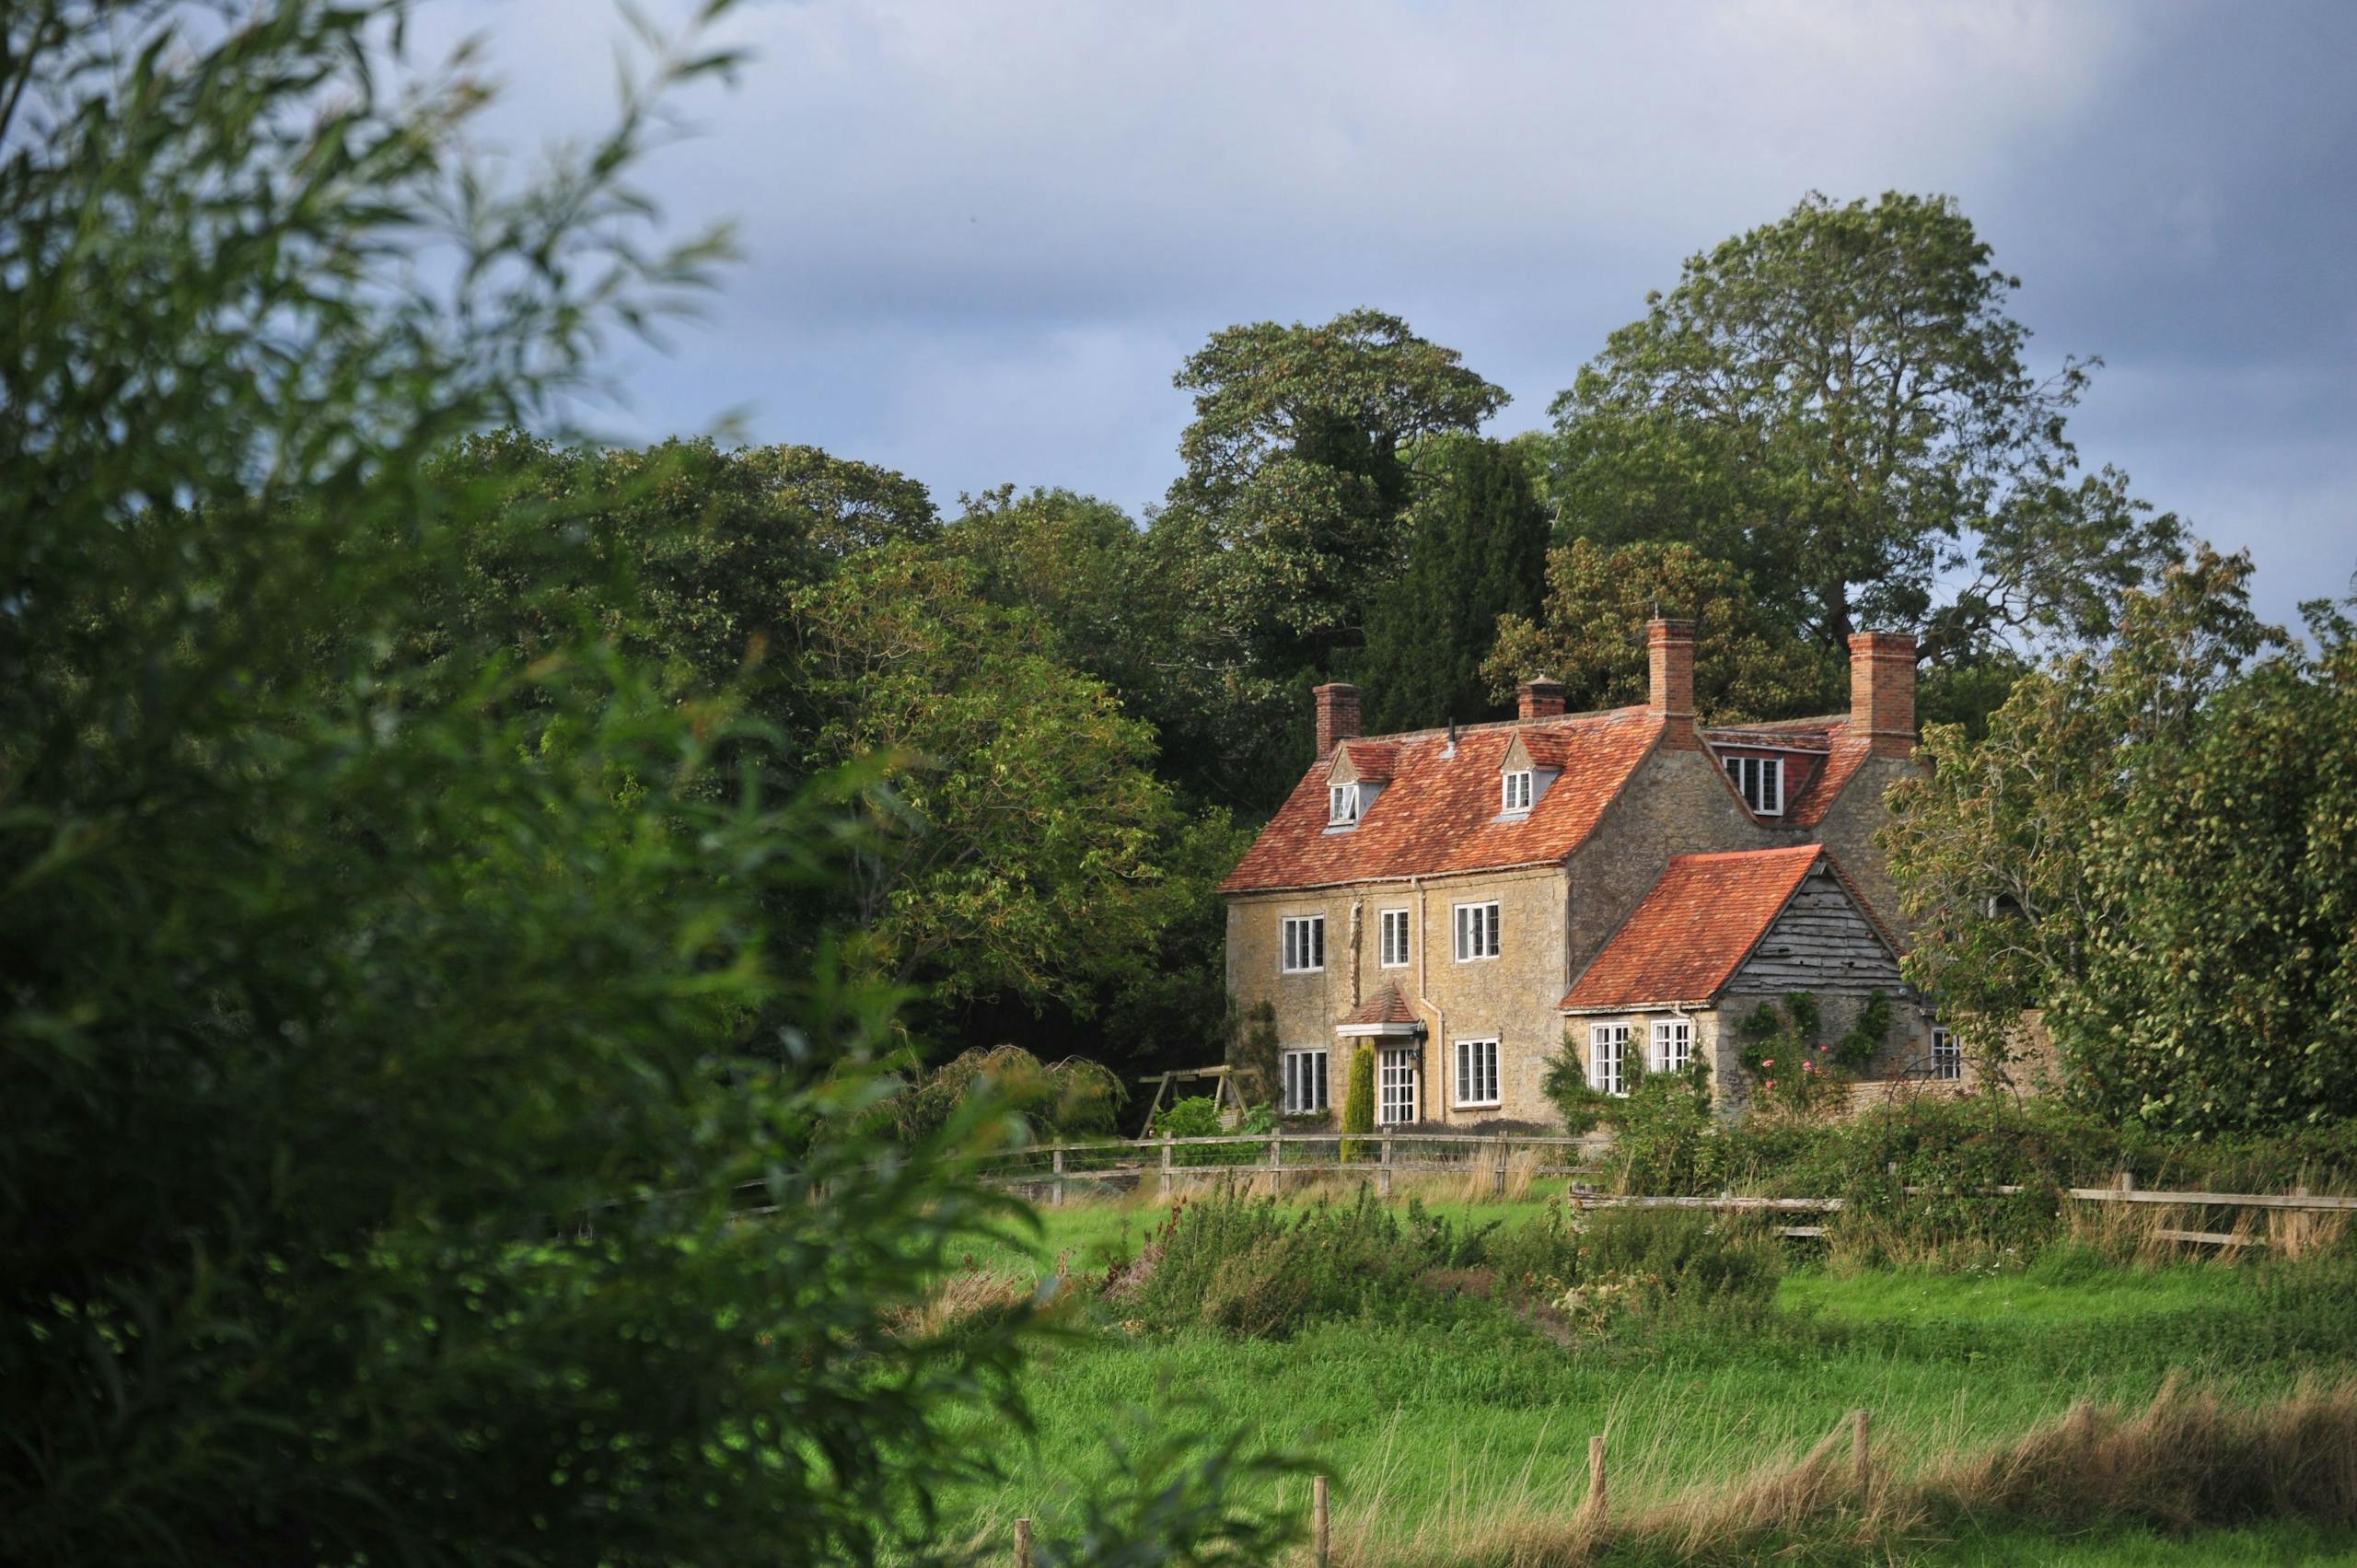 The village of Garsington is a 35-minute drive from Oxford's knowledge hub during rush hour